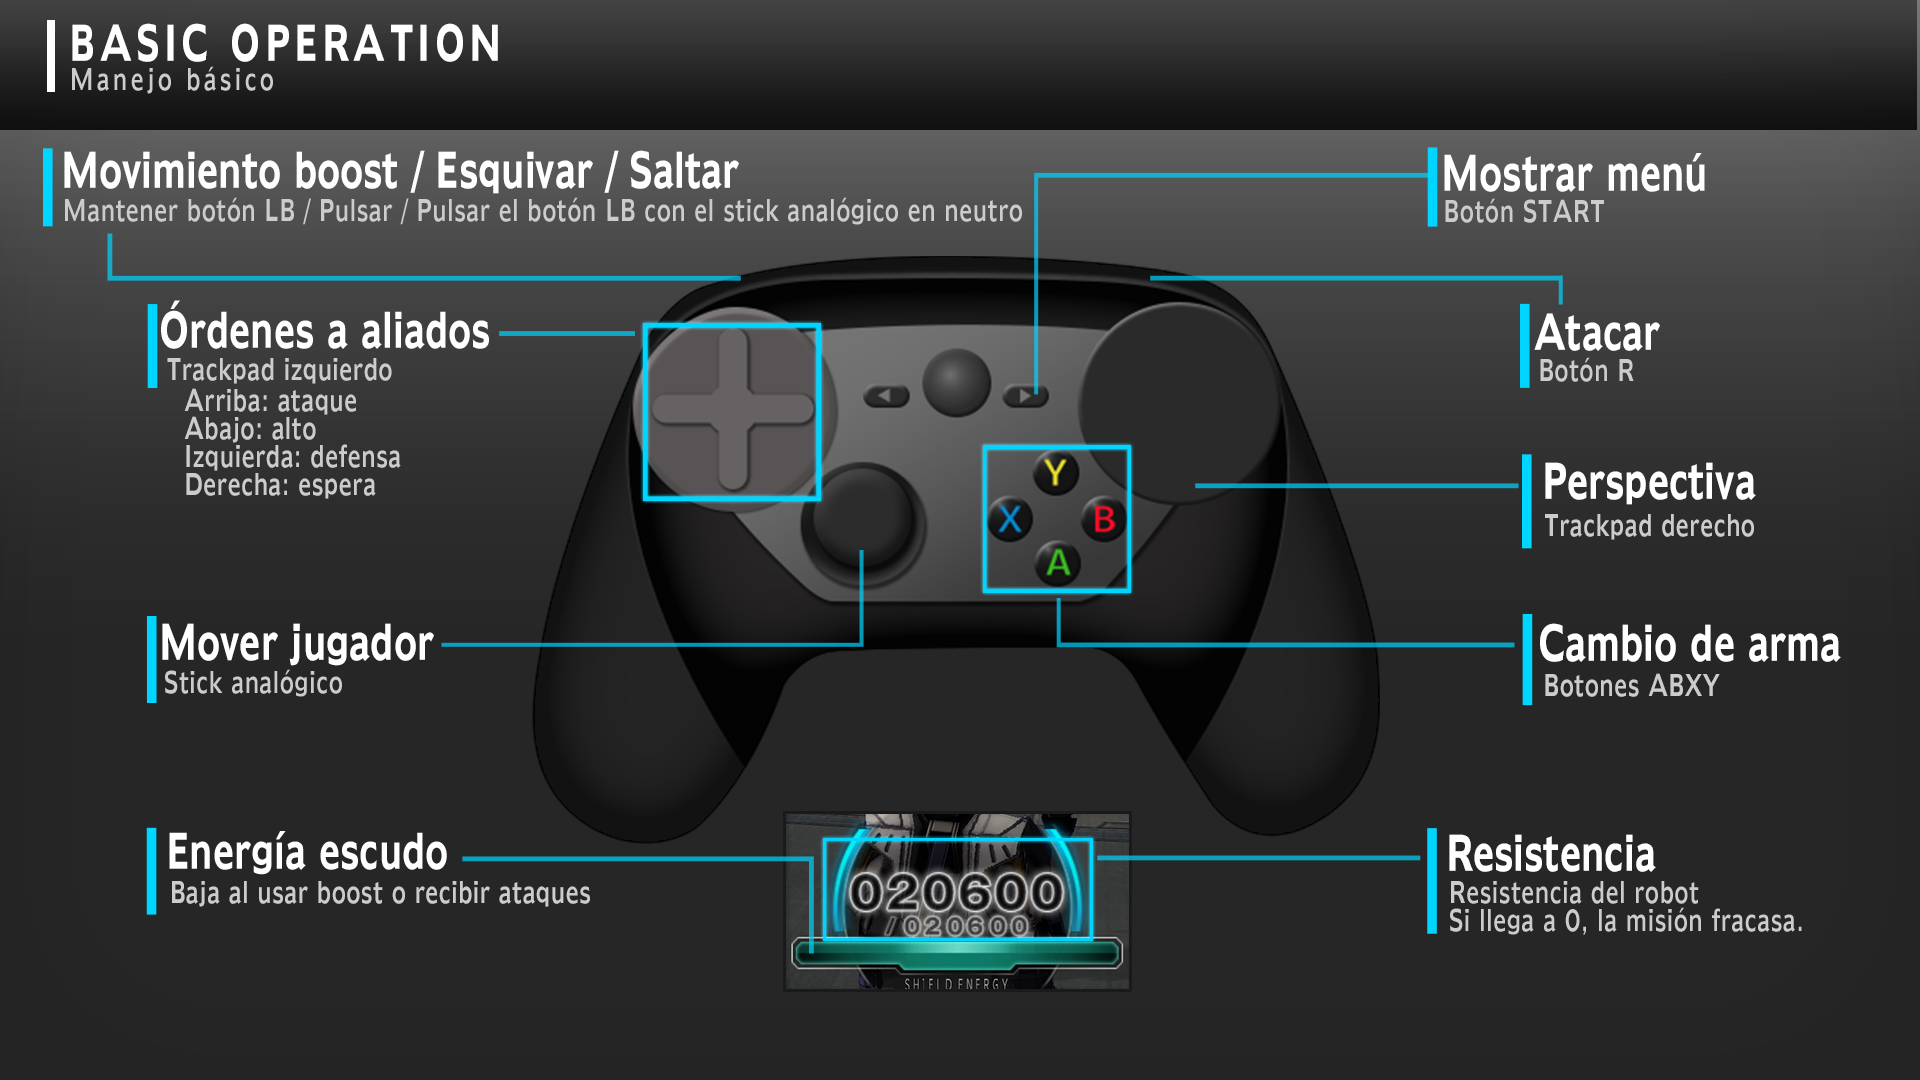 Controls Page